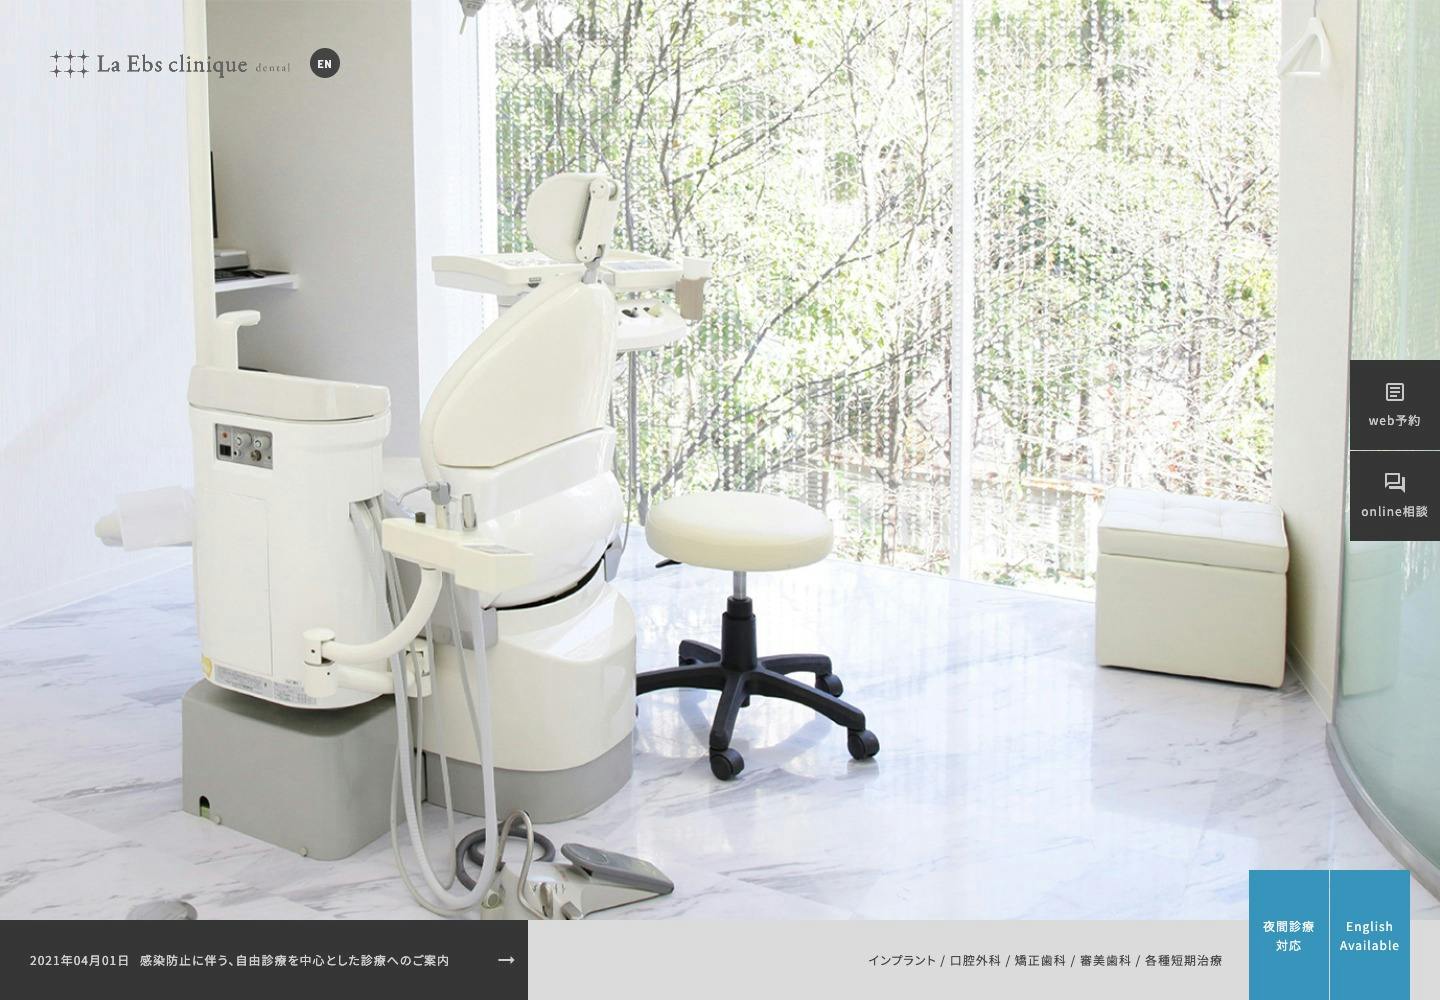 Cover Image for 恵比寿でインプラント・矯正・審美歯科なら ラ エビス クリニ―ク デンタル（La Ebs clinique dental）